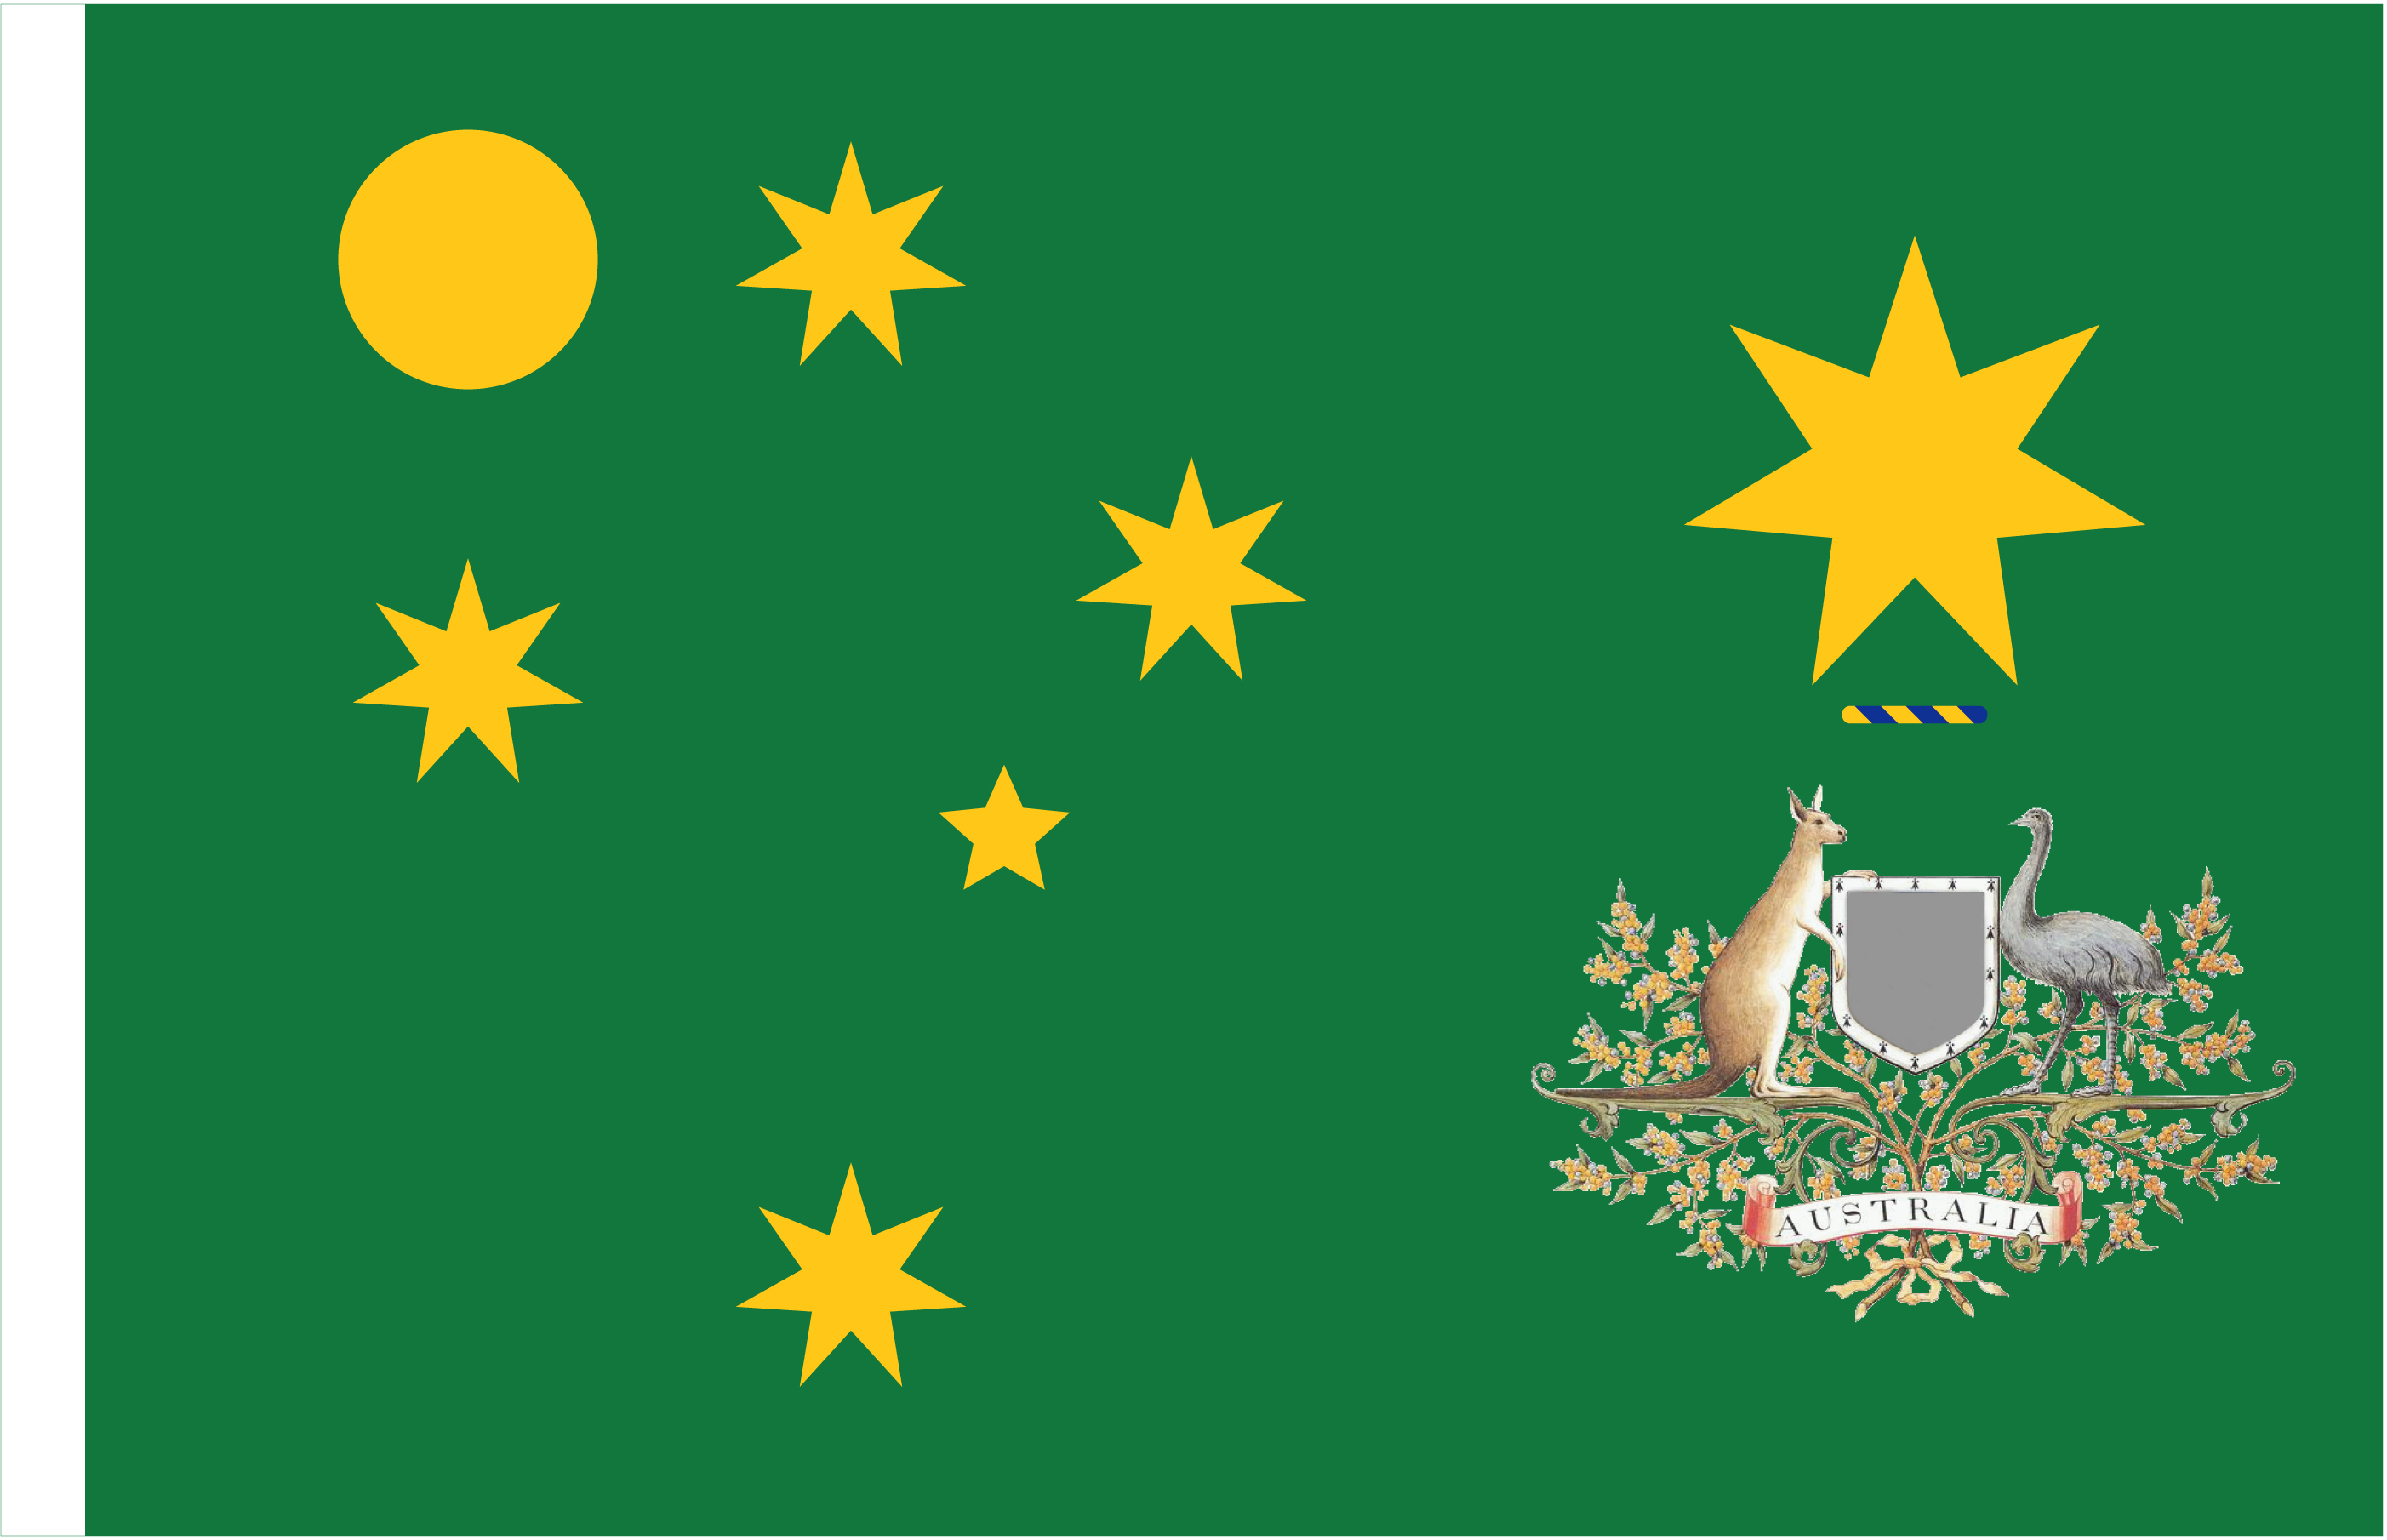 File:Seven Golden Stars with Coat Arms (covered).jpg - Wikimedia